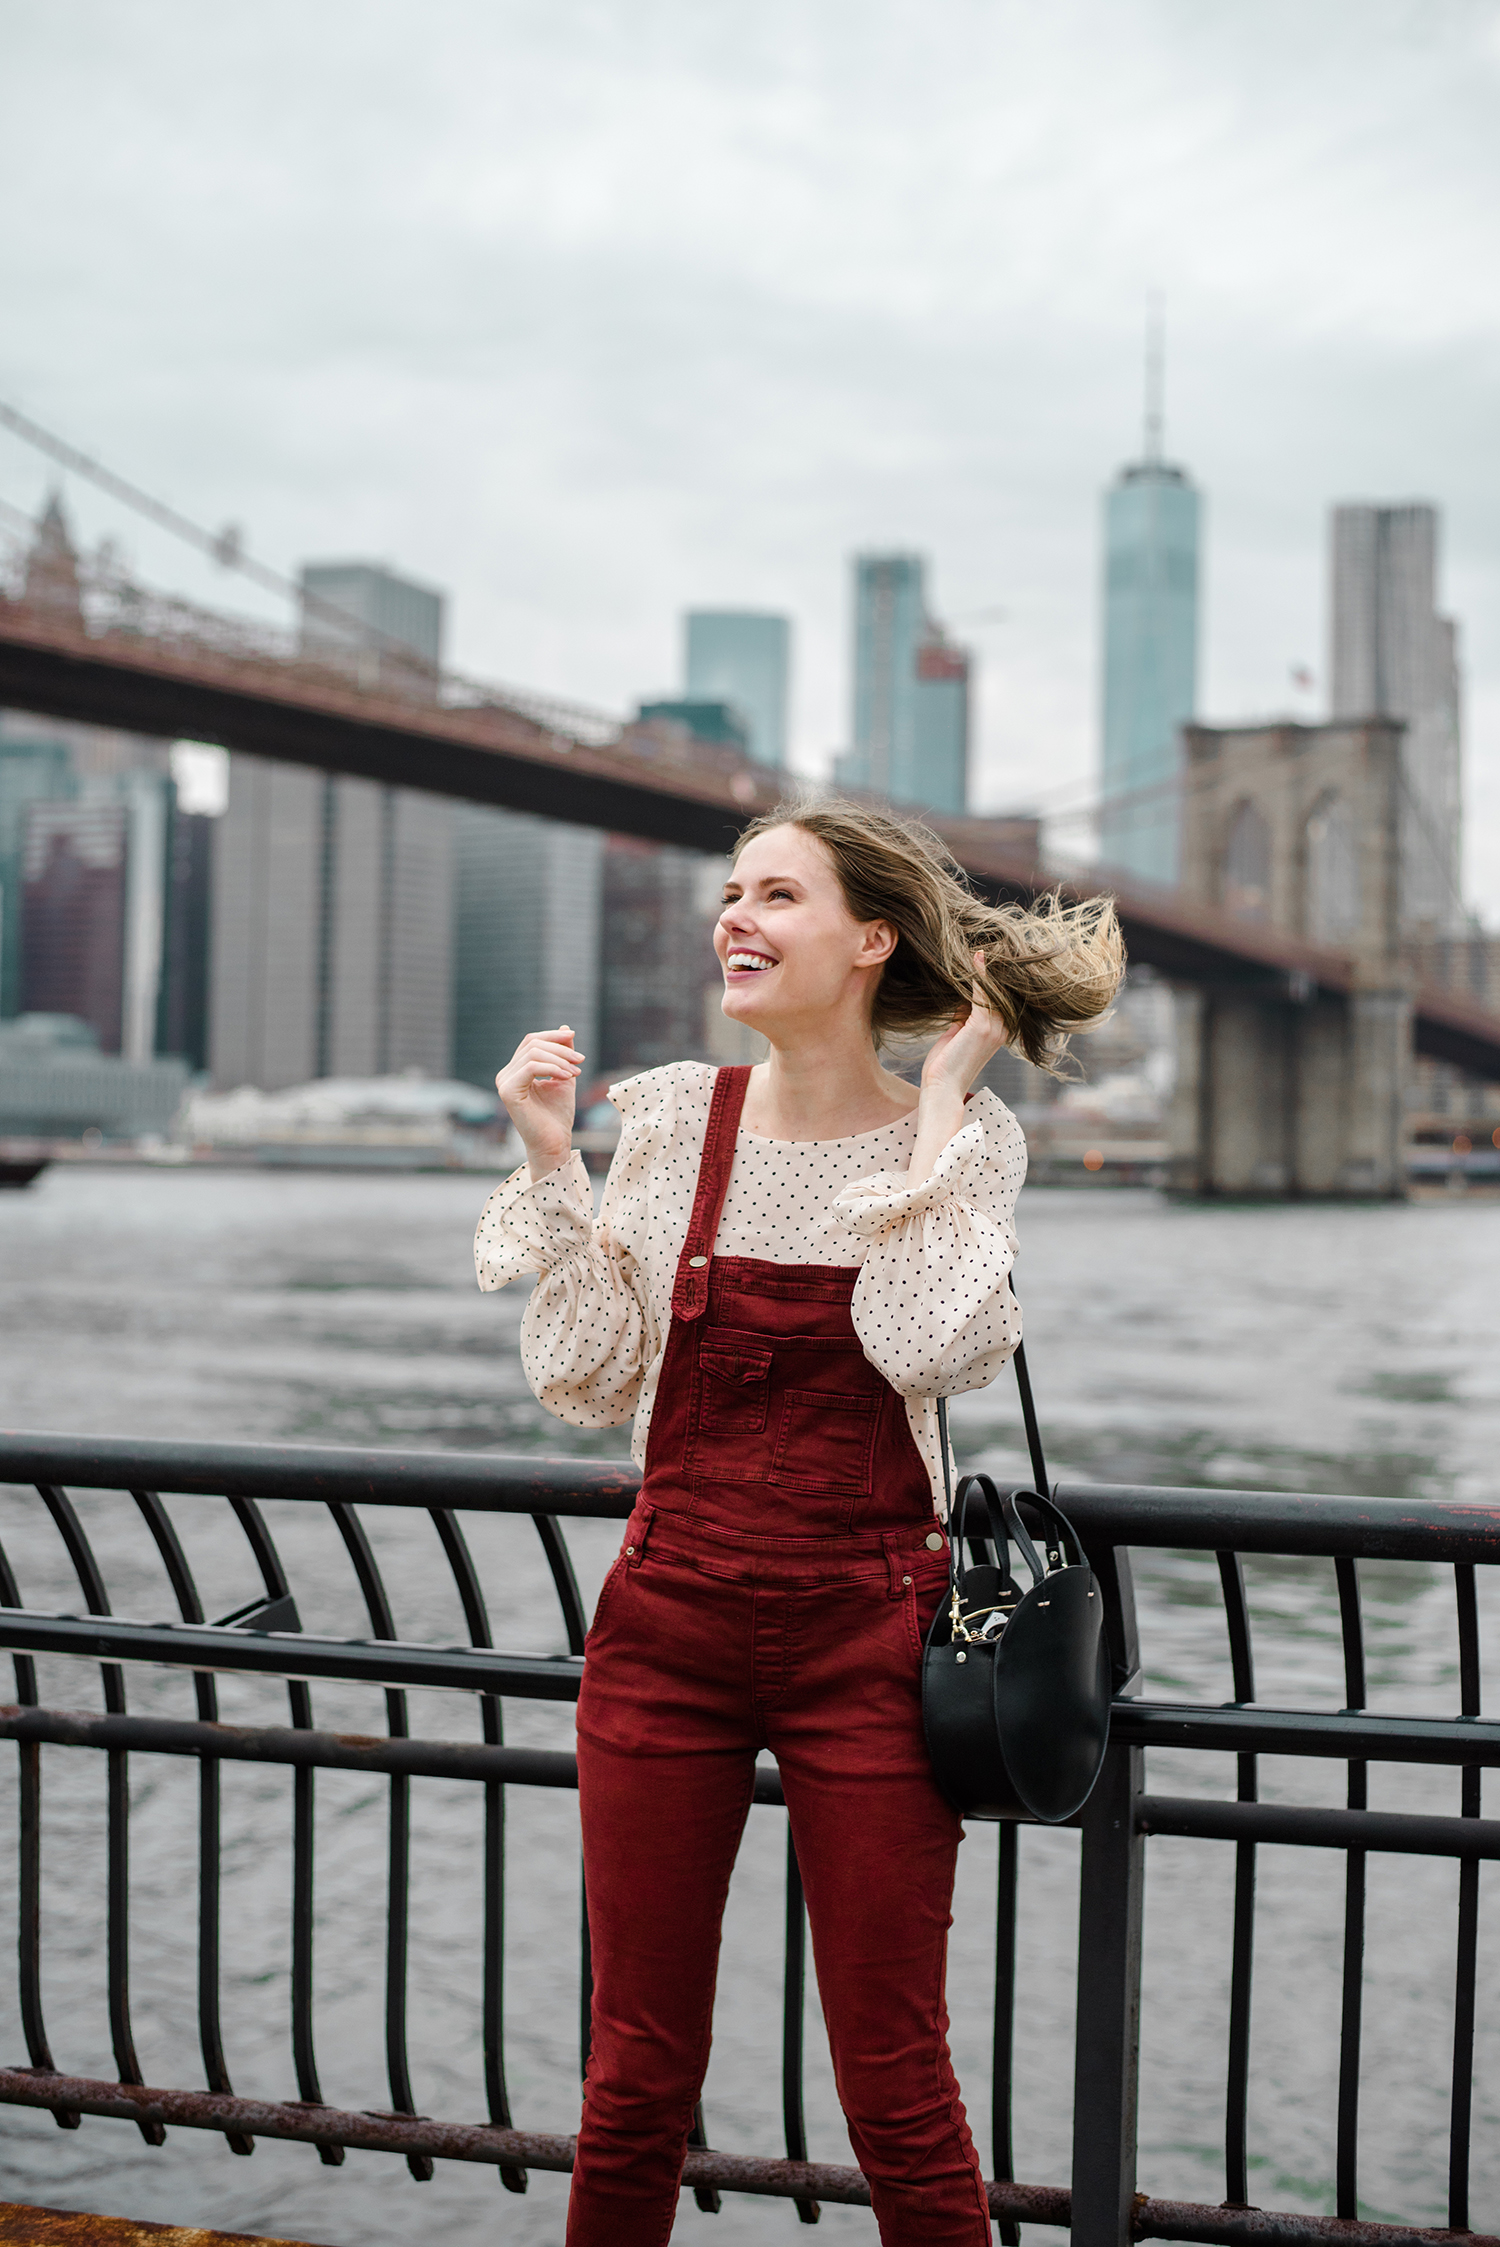 Alyssa Campanella of The A List blog enjoys autumn in New York wearing Free People washed denim overalls and Clare V Alistair bag